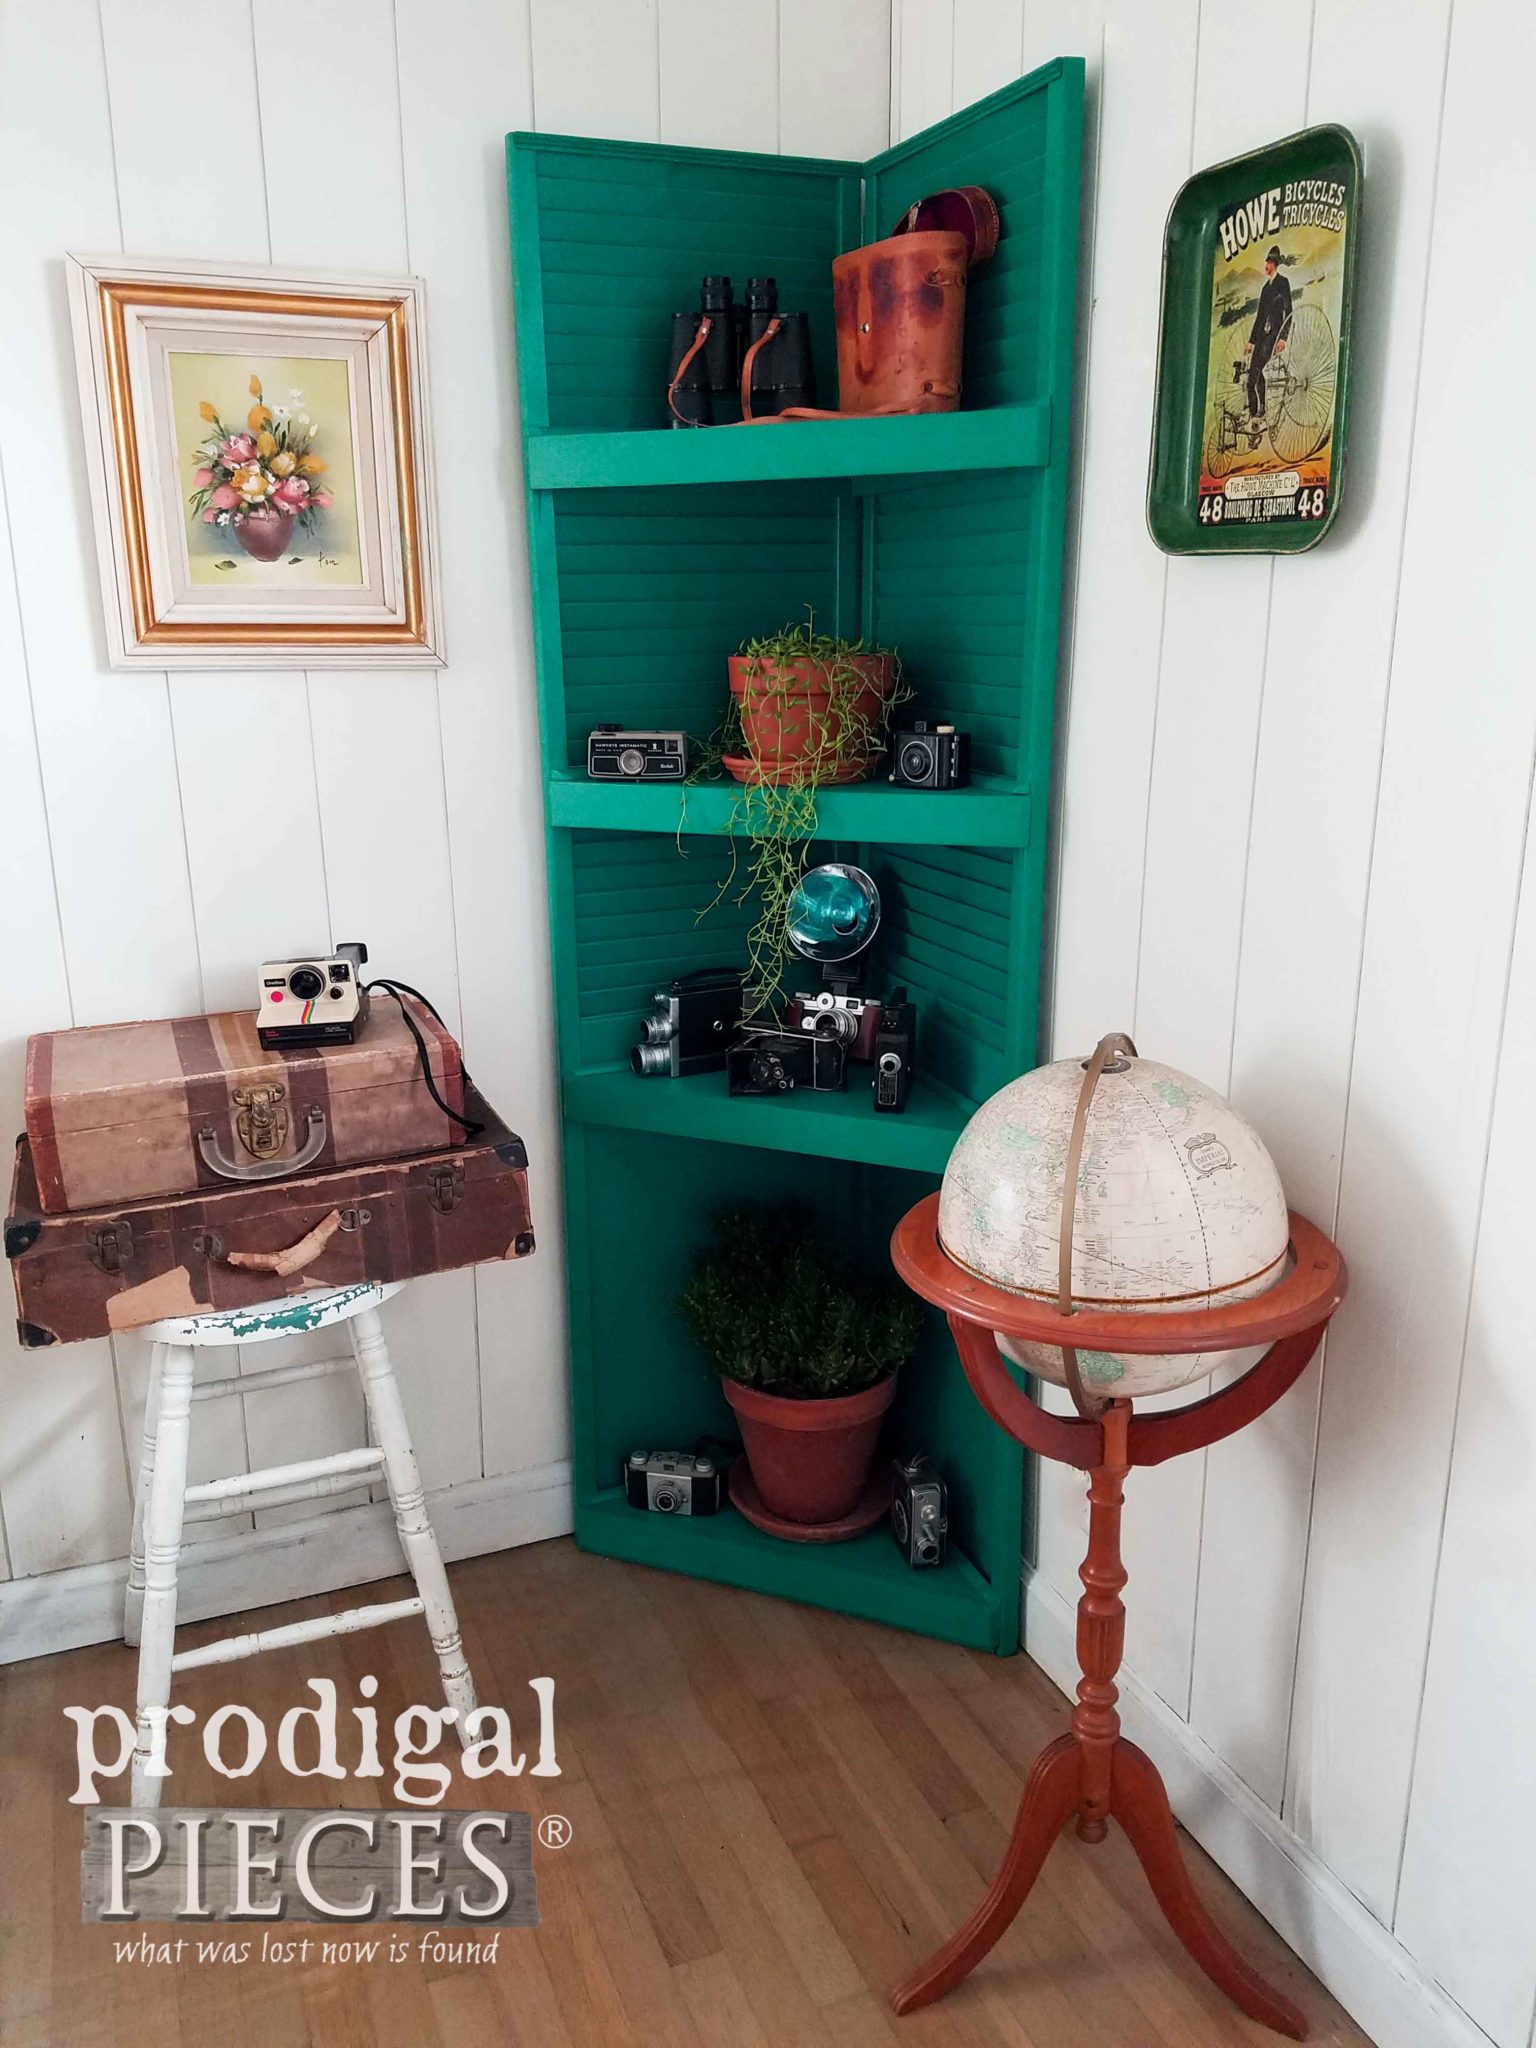 Corner Shelf Built by Larissa of Prodigal Pieces by Upcycling a Pair of Wooden Louver Doors | prodigalpieces.com